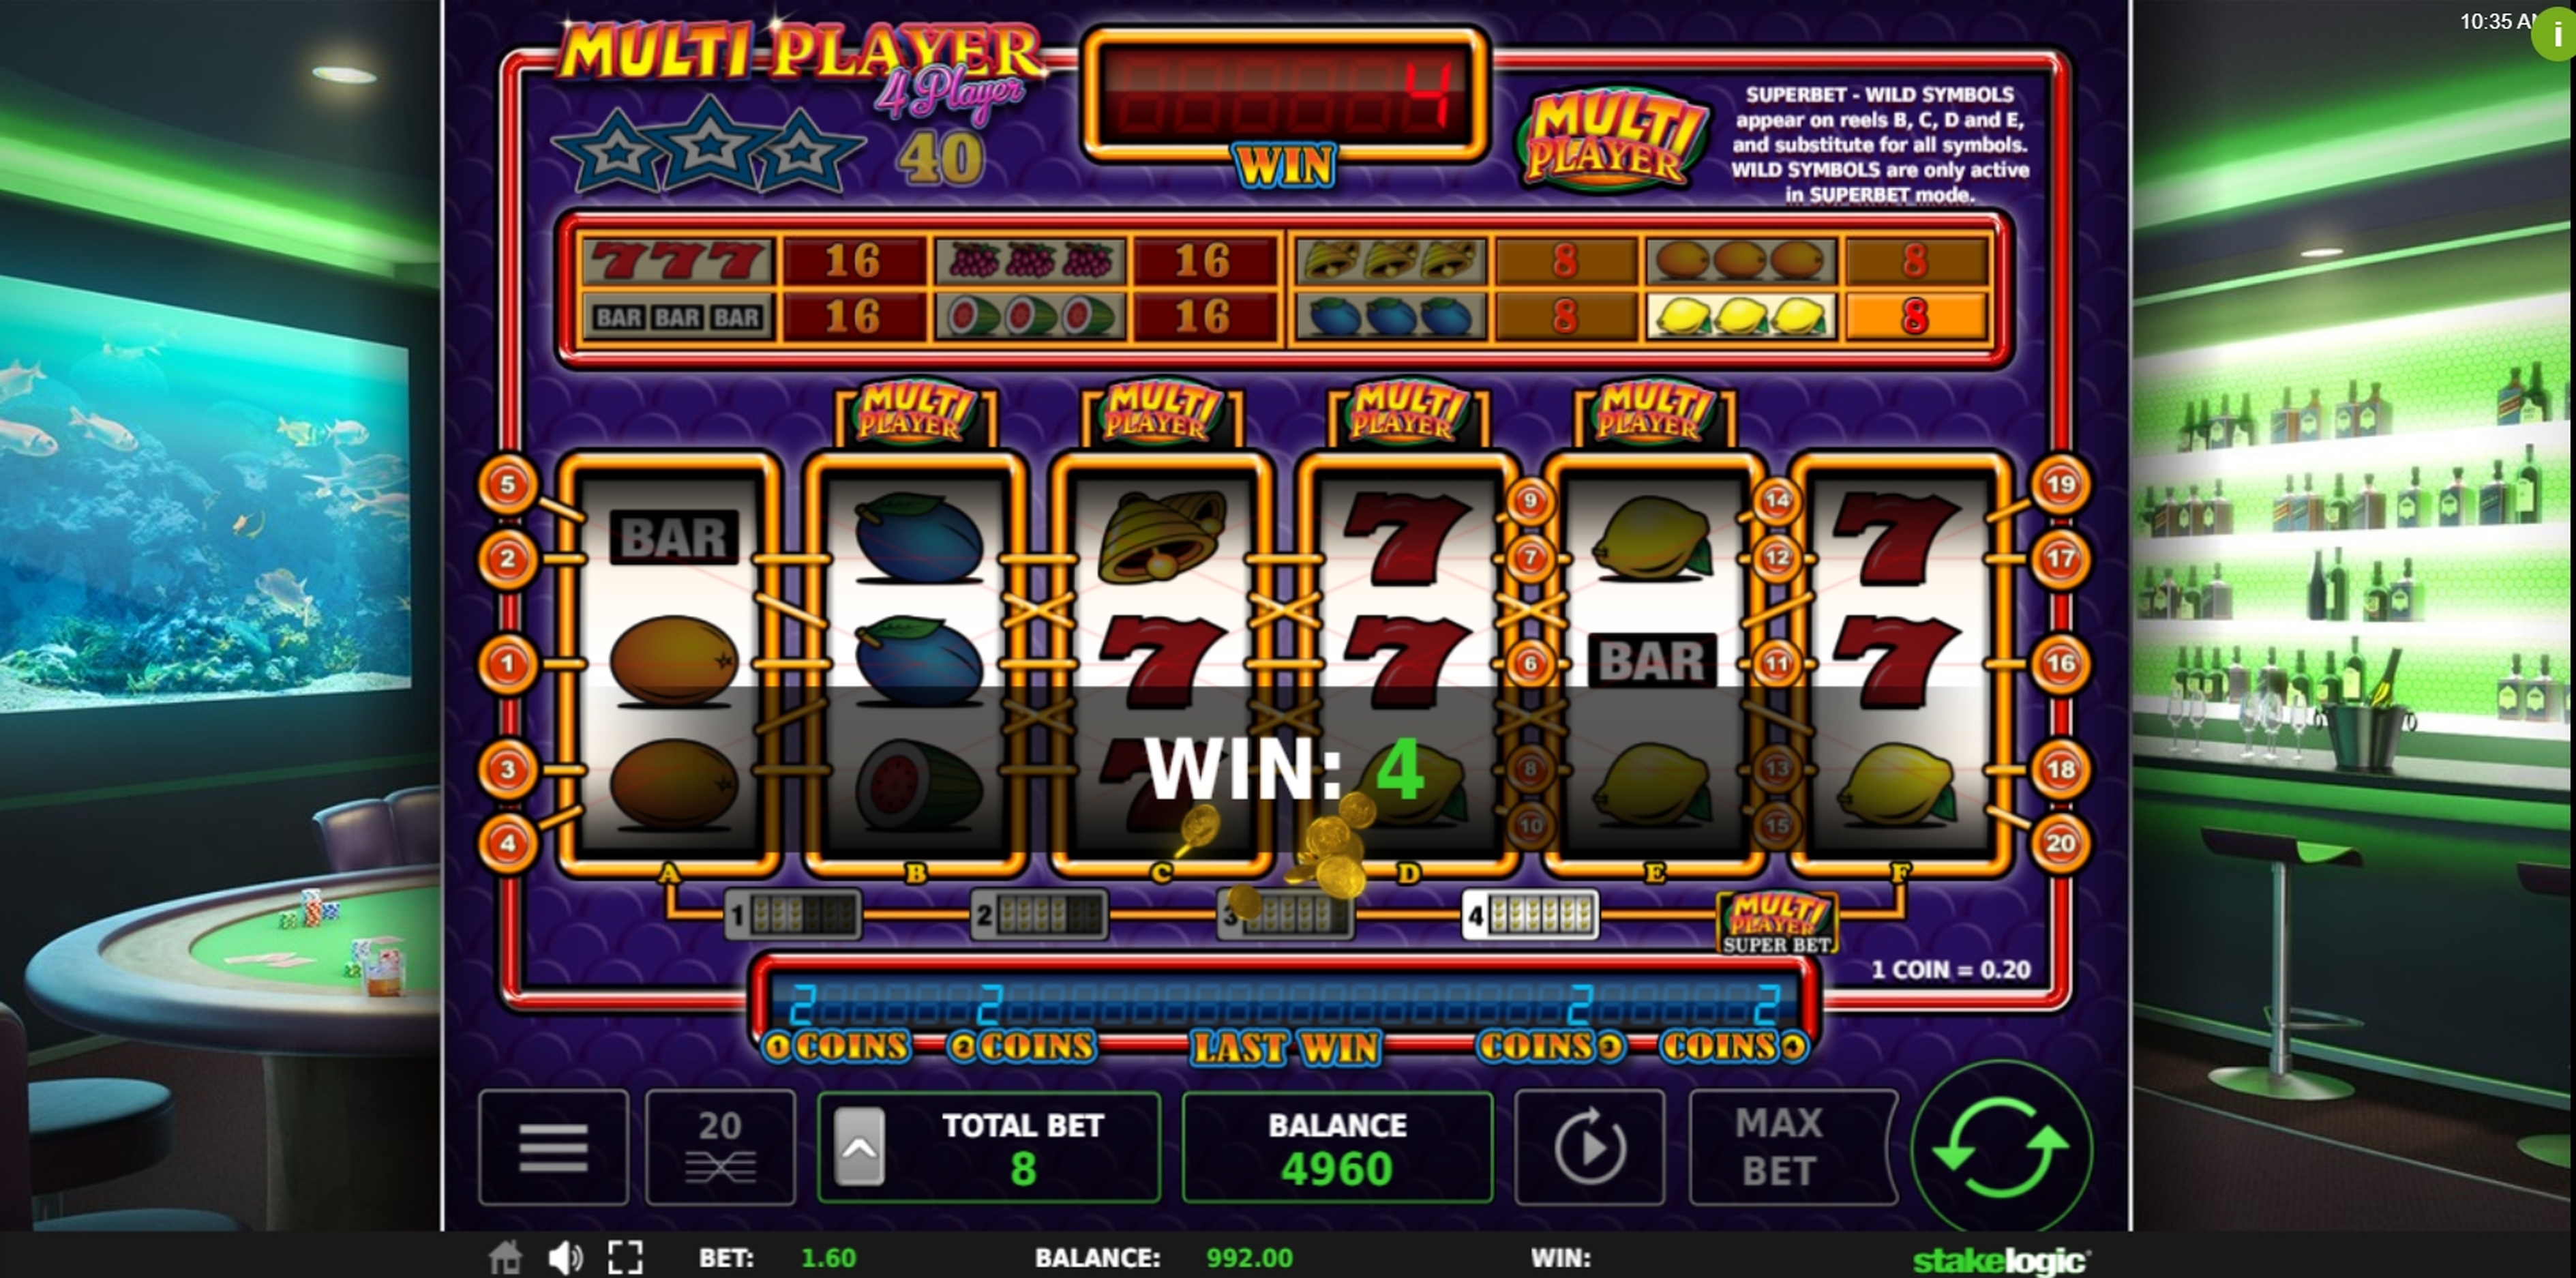 Win Money in Multiplayer 4 Player Free Slot Game by Stakelogic